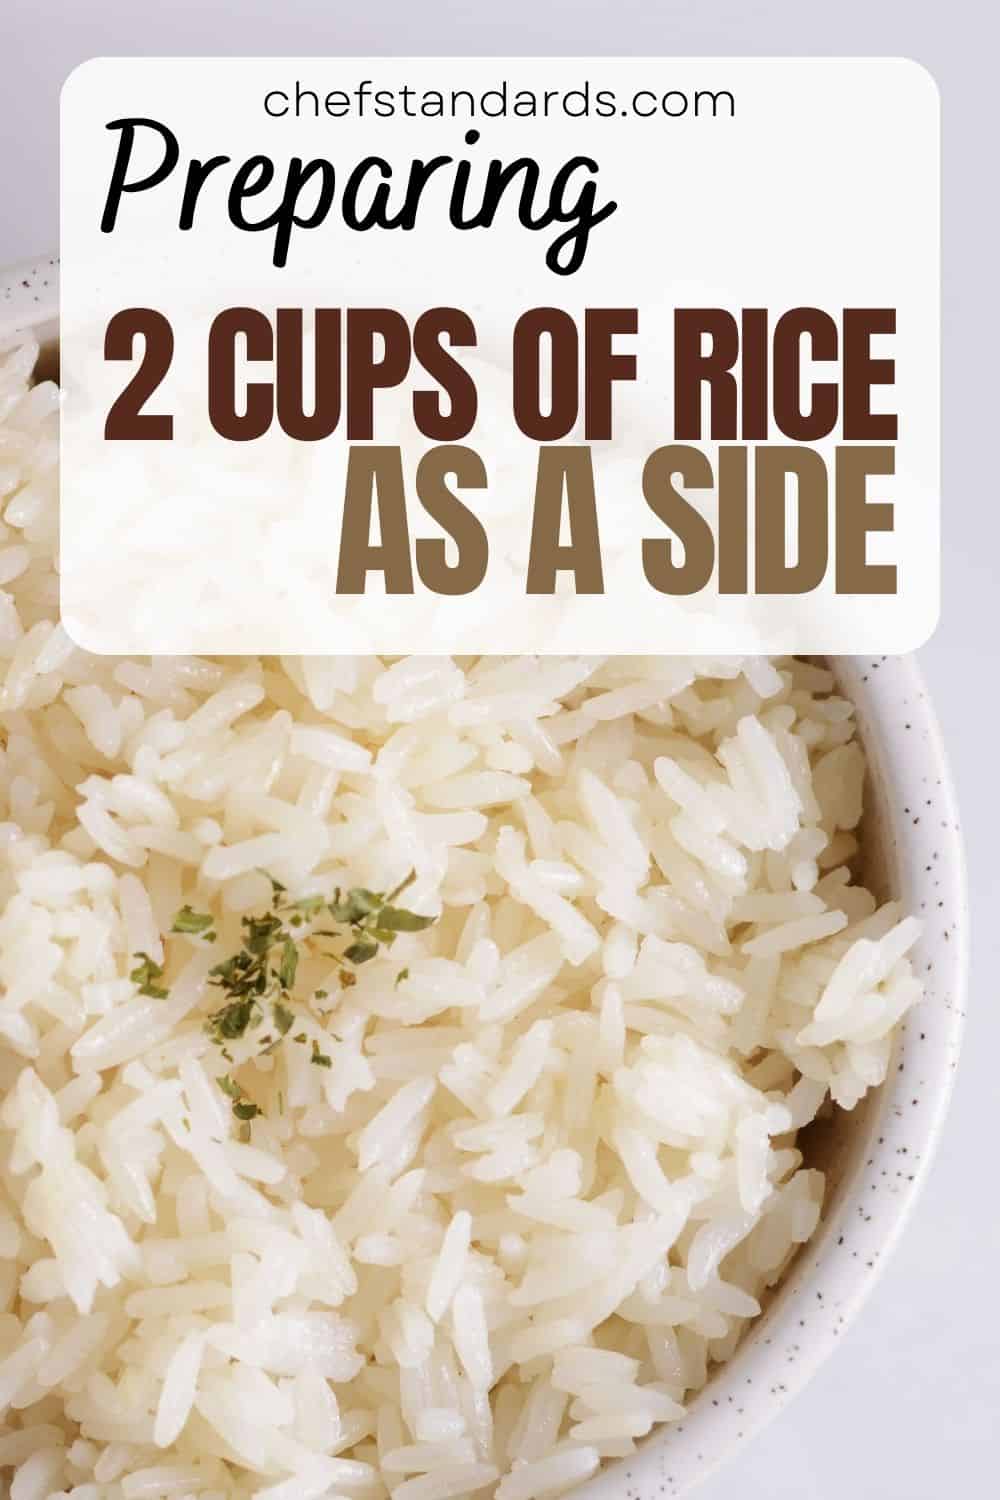 How Much Water Do You Need To Cook 2 Cups Of Rice (Recipe)
